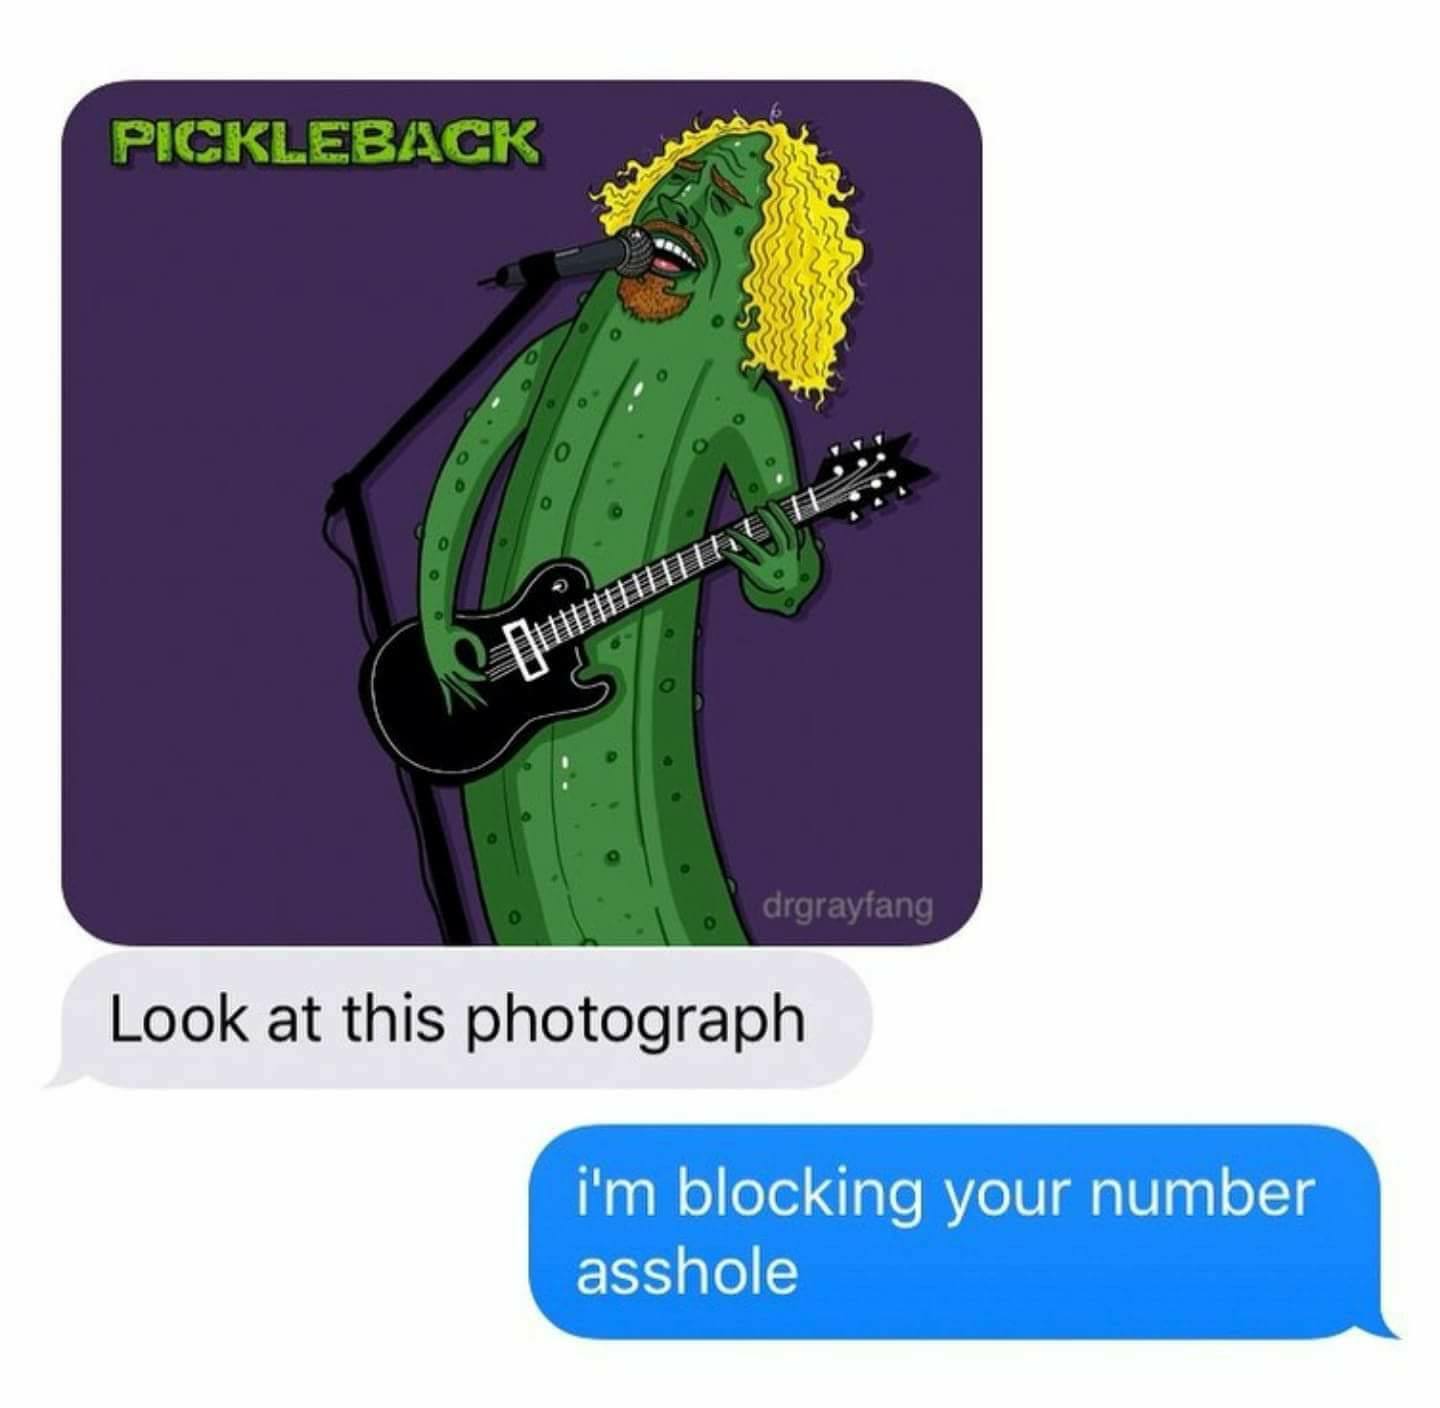 pickle rick and nickelback amalgam in a DM